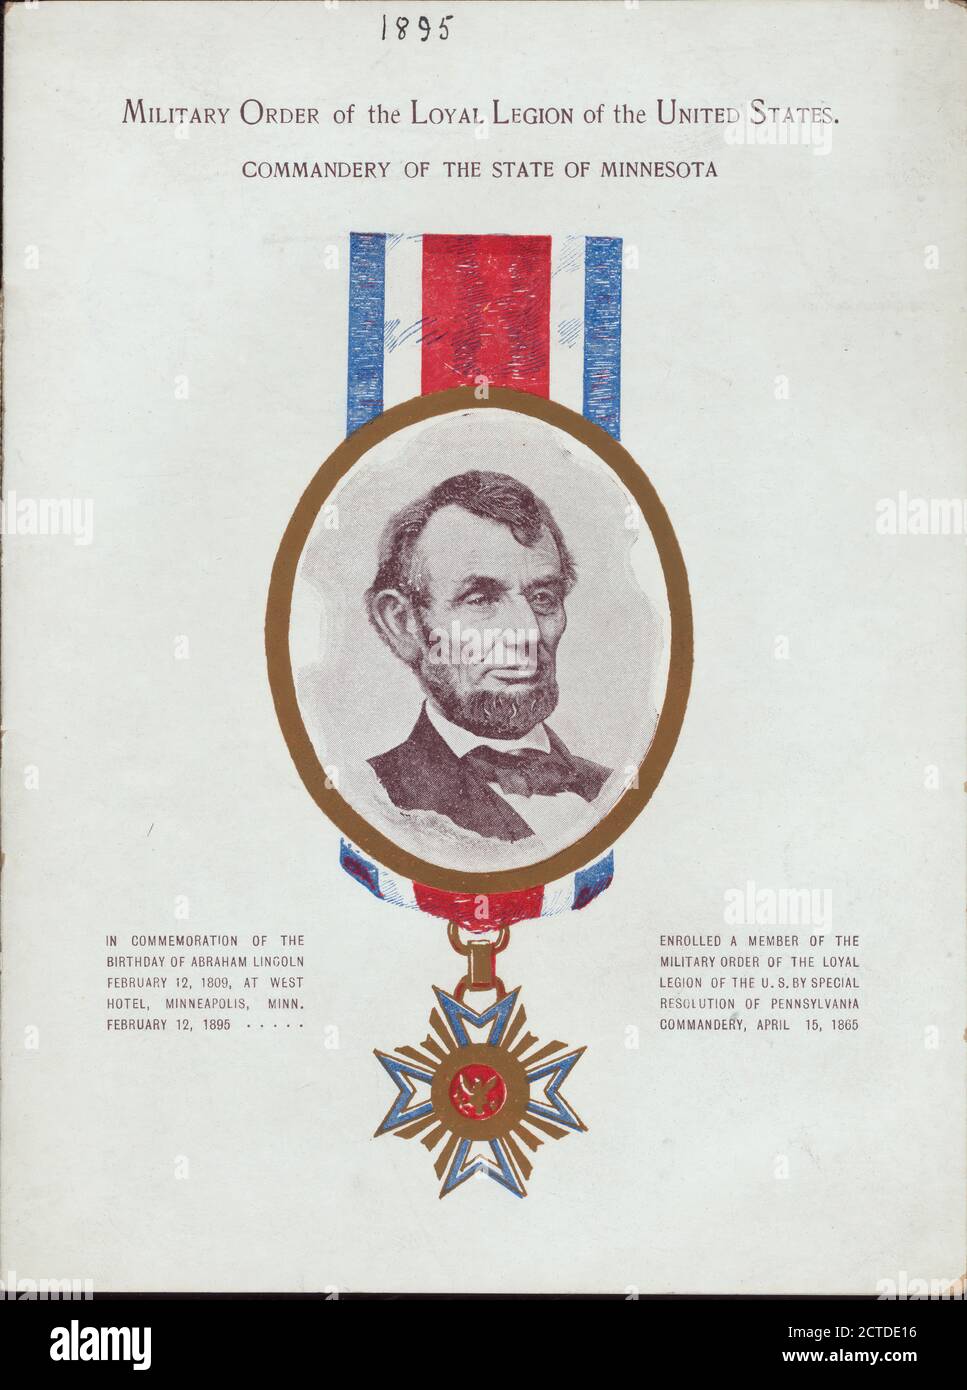 LINCOLN'S BIRTHDAY DINNER held by MILITARY ORDER OF THE LOYAL LEGION OF THE U.S. COMMANDERY OF MINNESOTA at 'WEST HOTEL, MINNEAPOLIS, MN' (HOTEL;), still image, Menus, 1895 Stock Photo